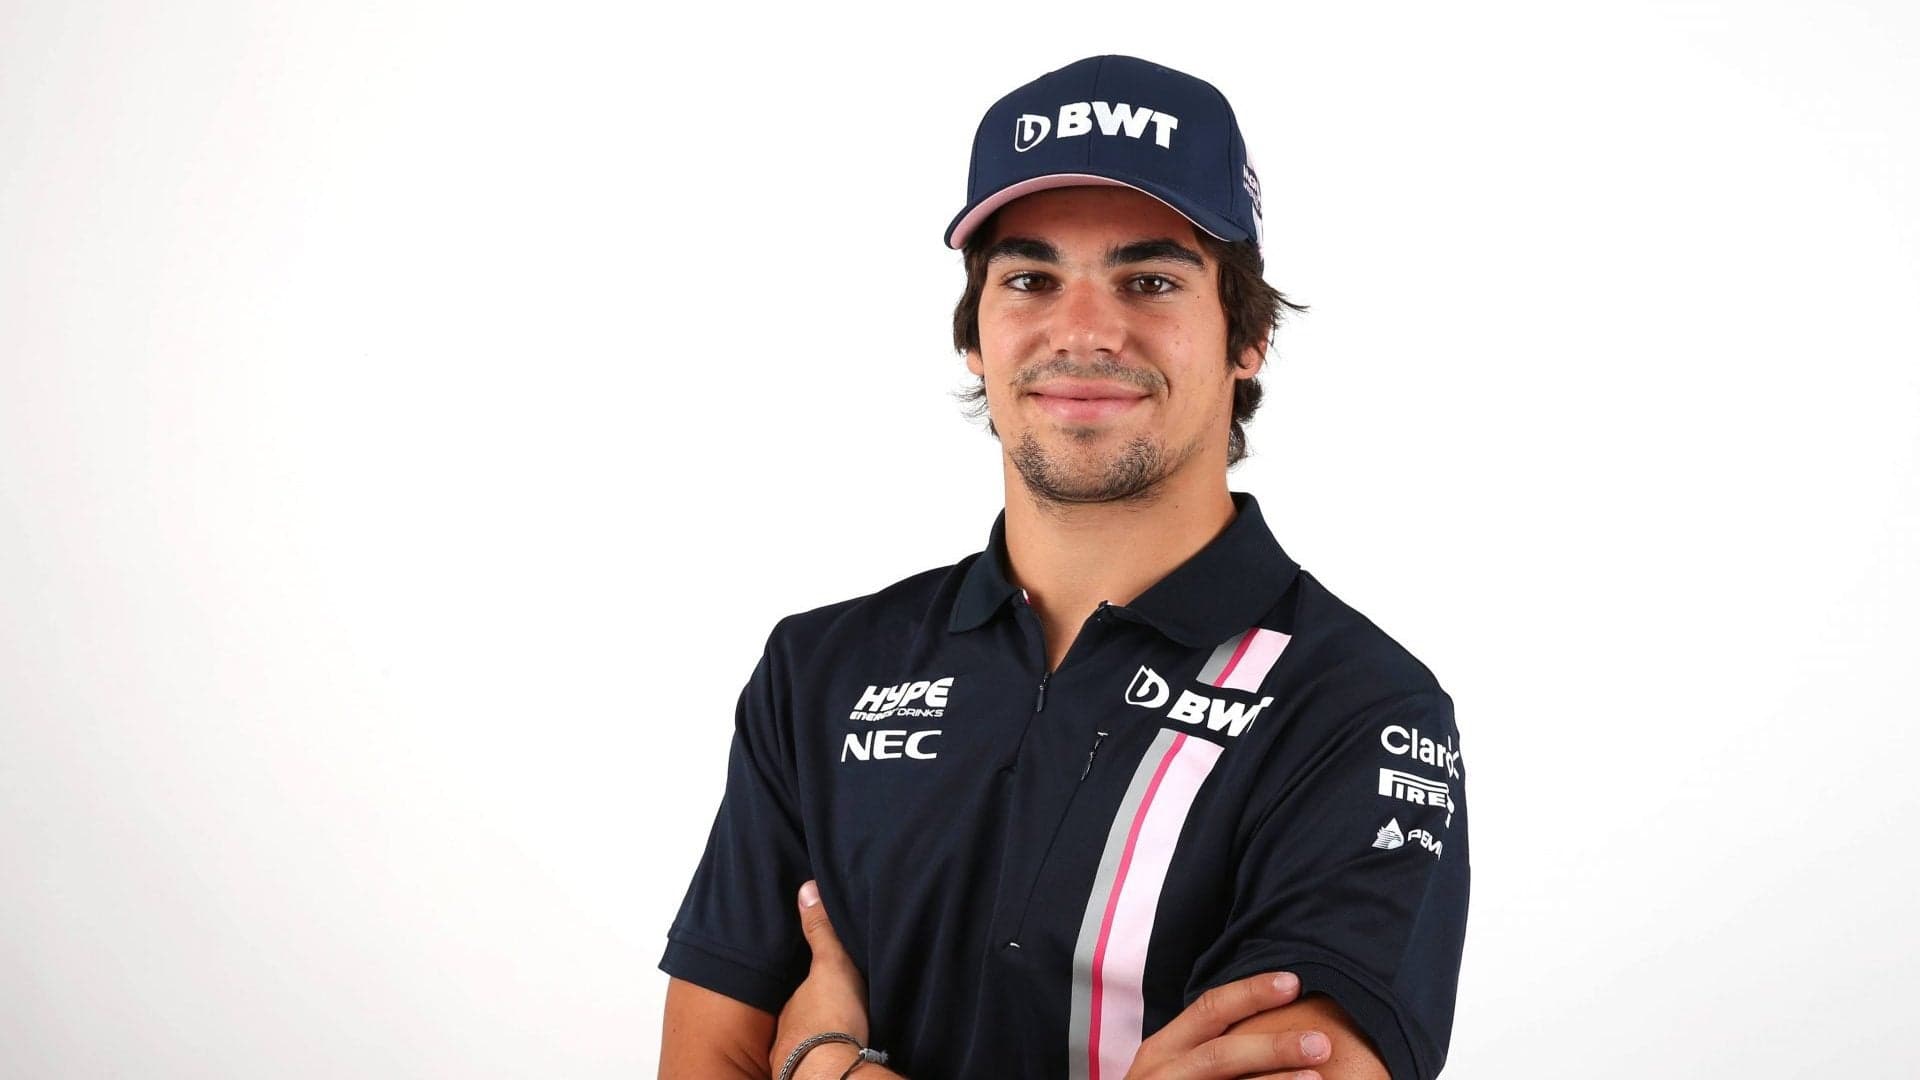 F1: Force India Confirms Lance Stroll Will Partner Sergio Perez in 2019